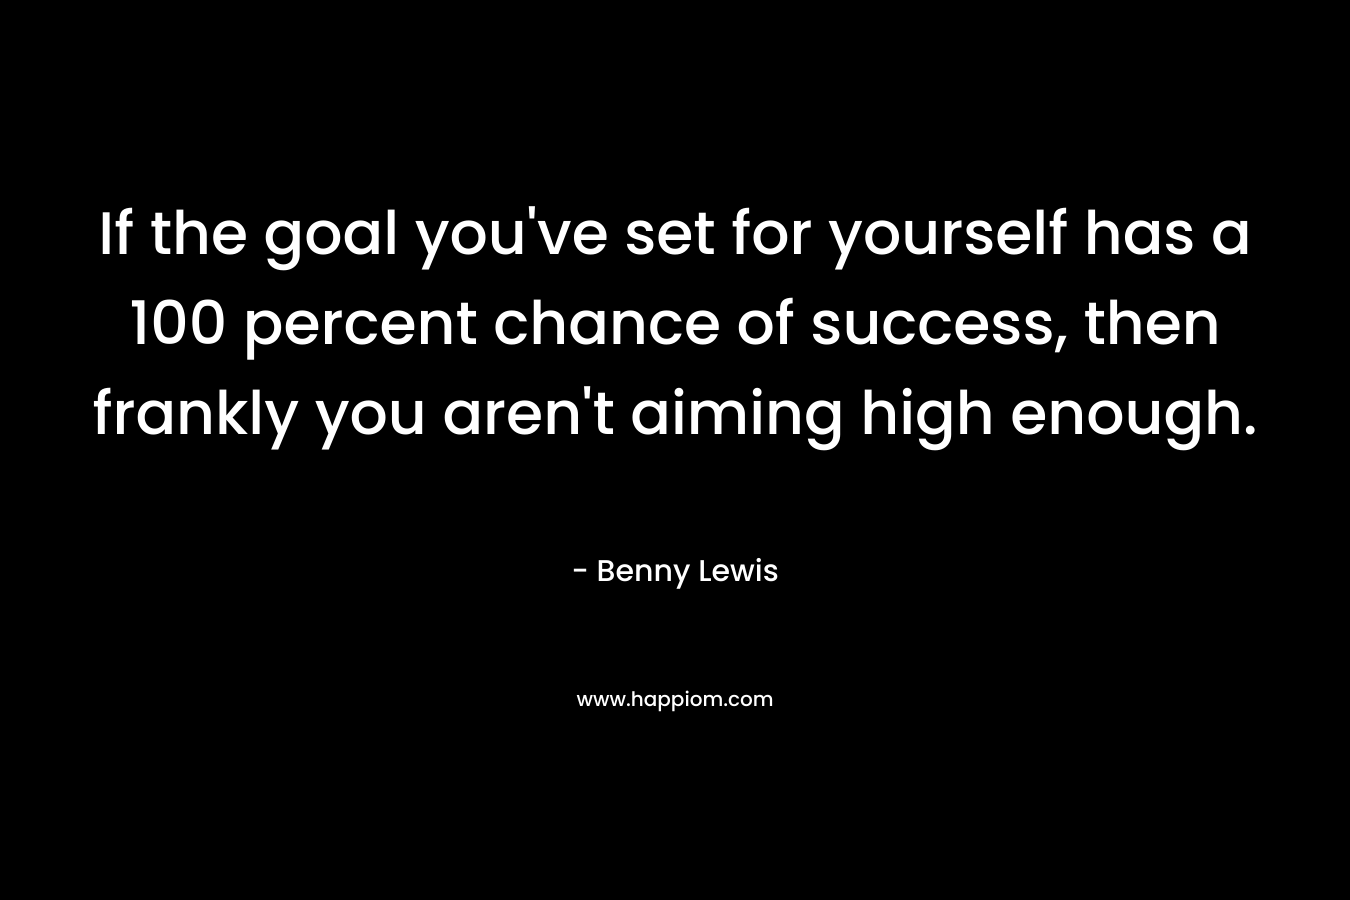 If the goal you've set for yourself has a 100 percent chance of success, then frankly you aren't aiming high enough.